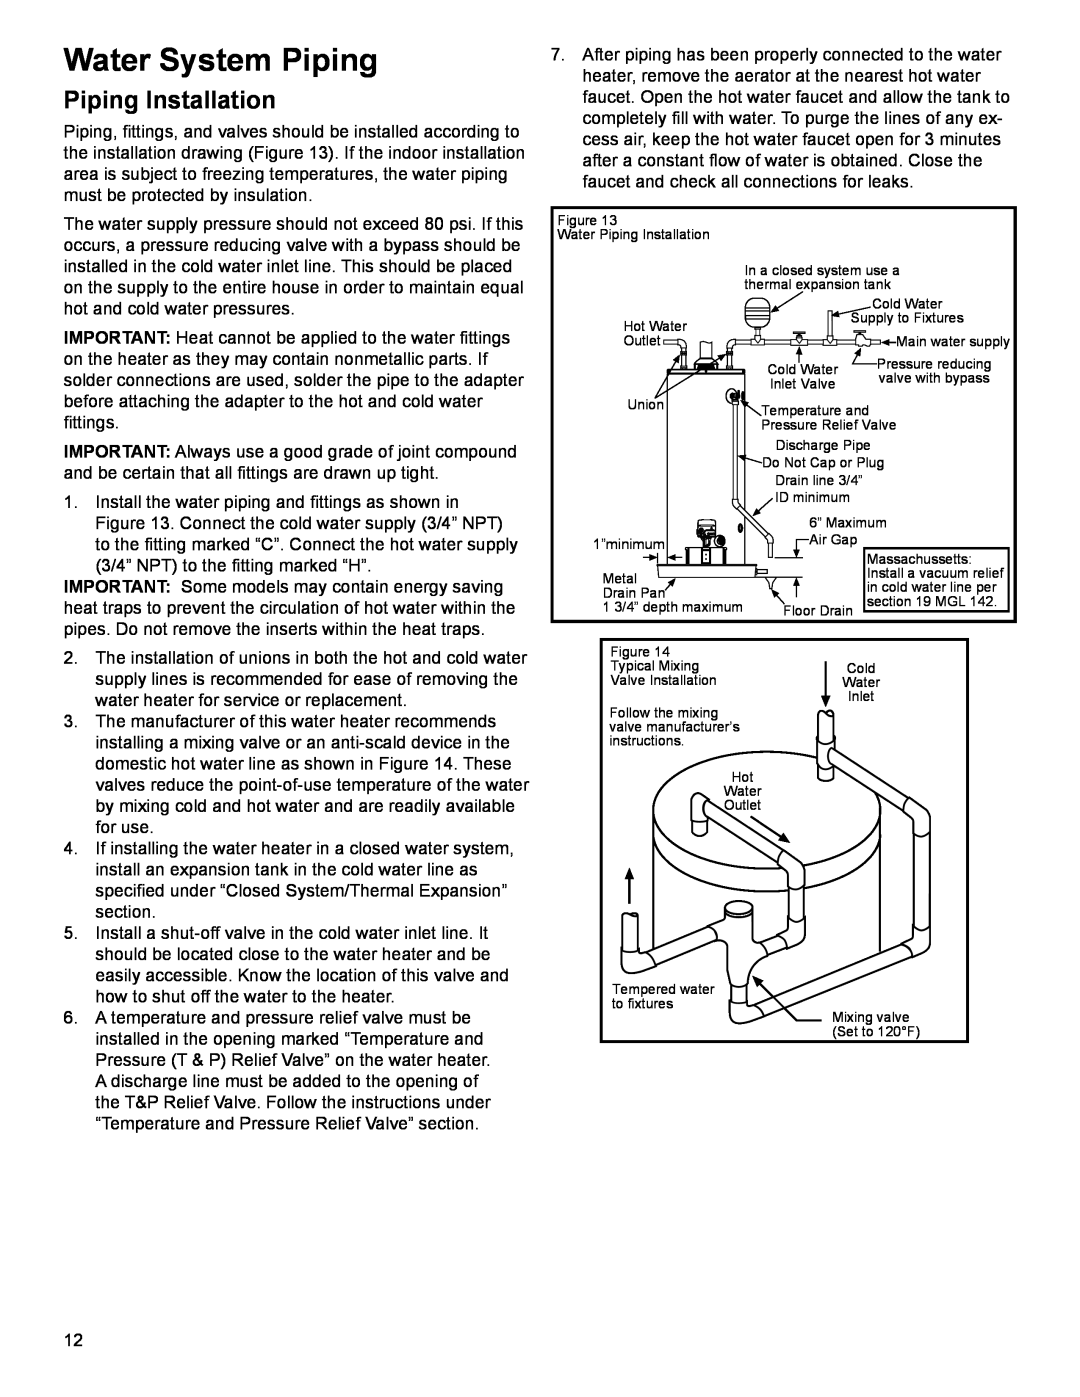 American Water Heater 318935-003 installation instructions Water System Piping, Piping Installation 